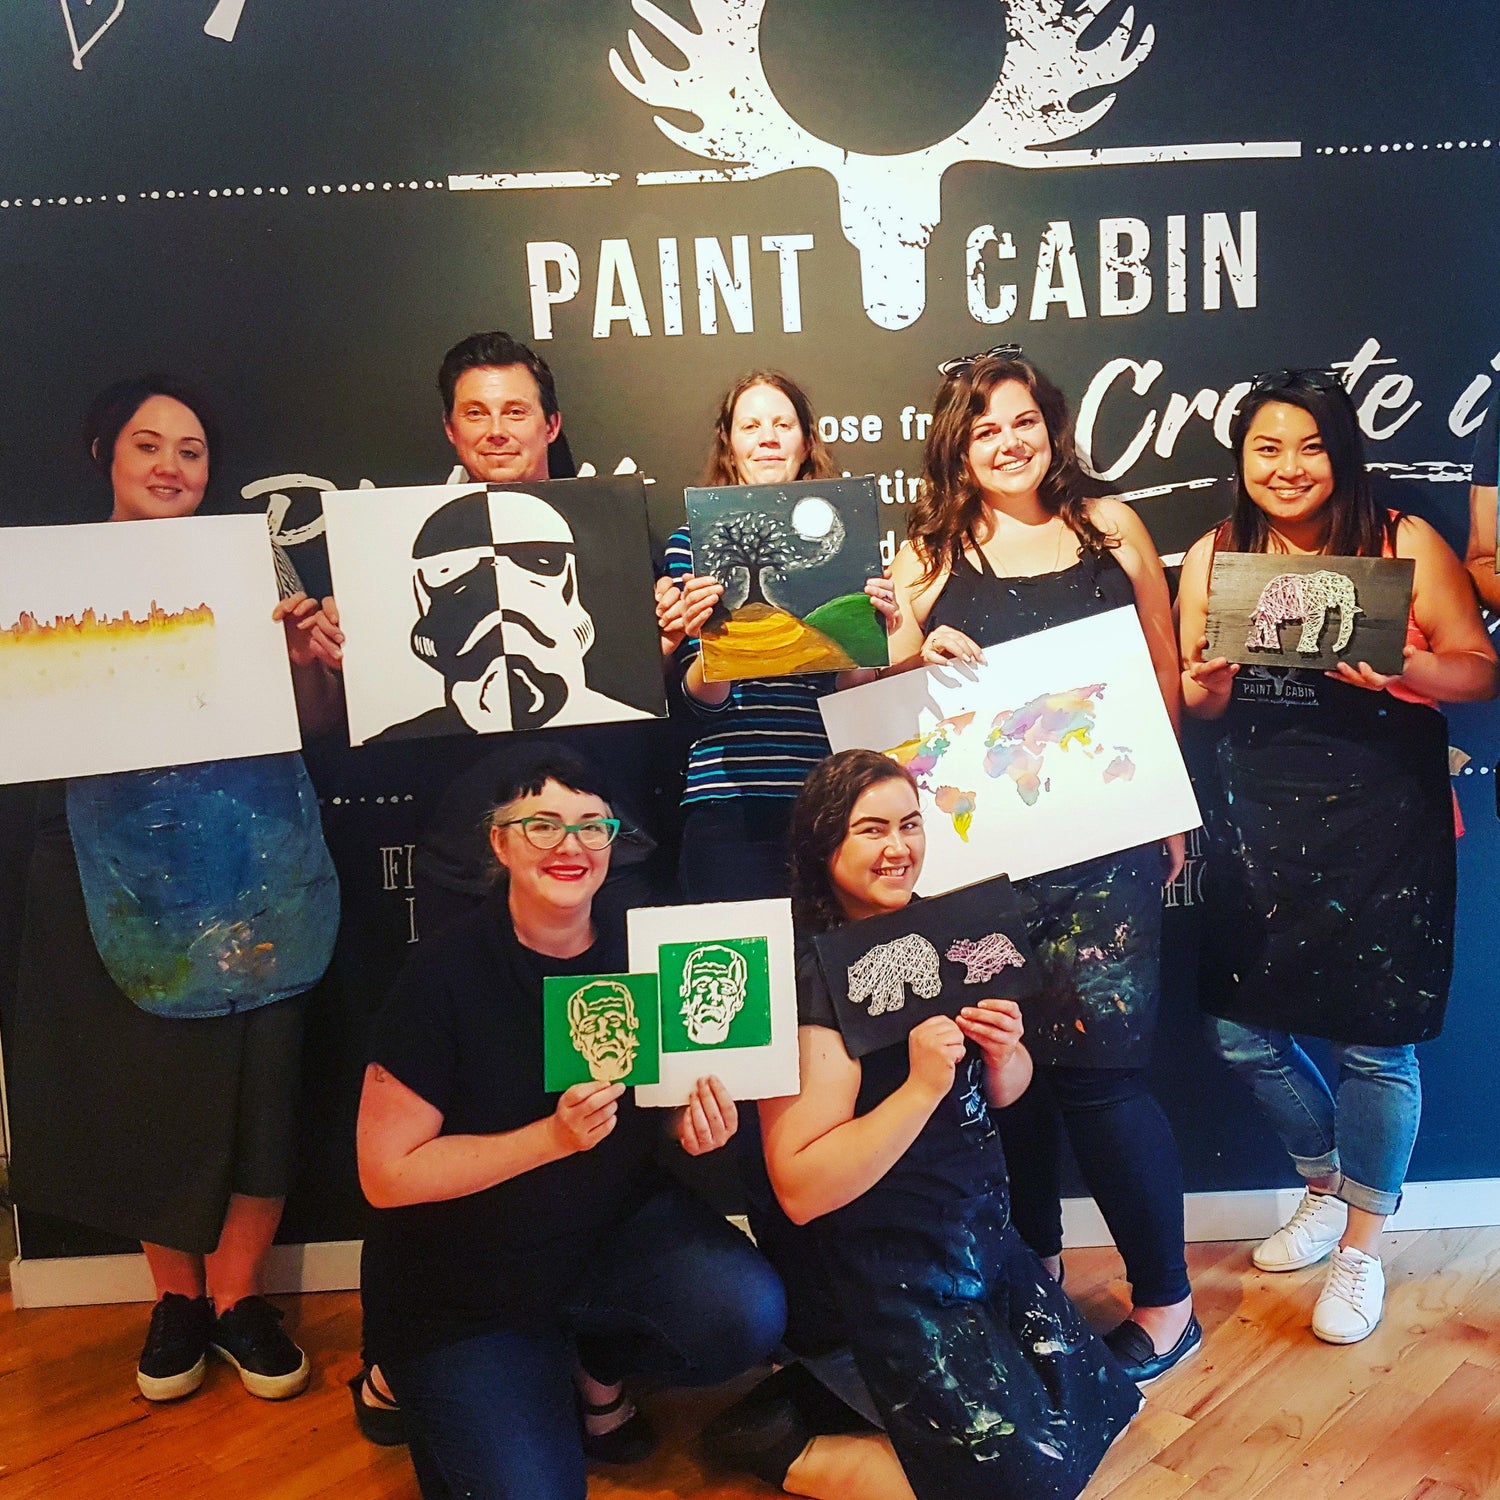 Things to check out in toronto this weekend -Paint Cabin Paint &amp; Sip Nights. Fun Drinks and Activities